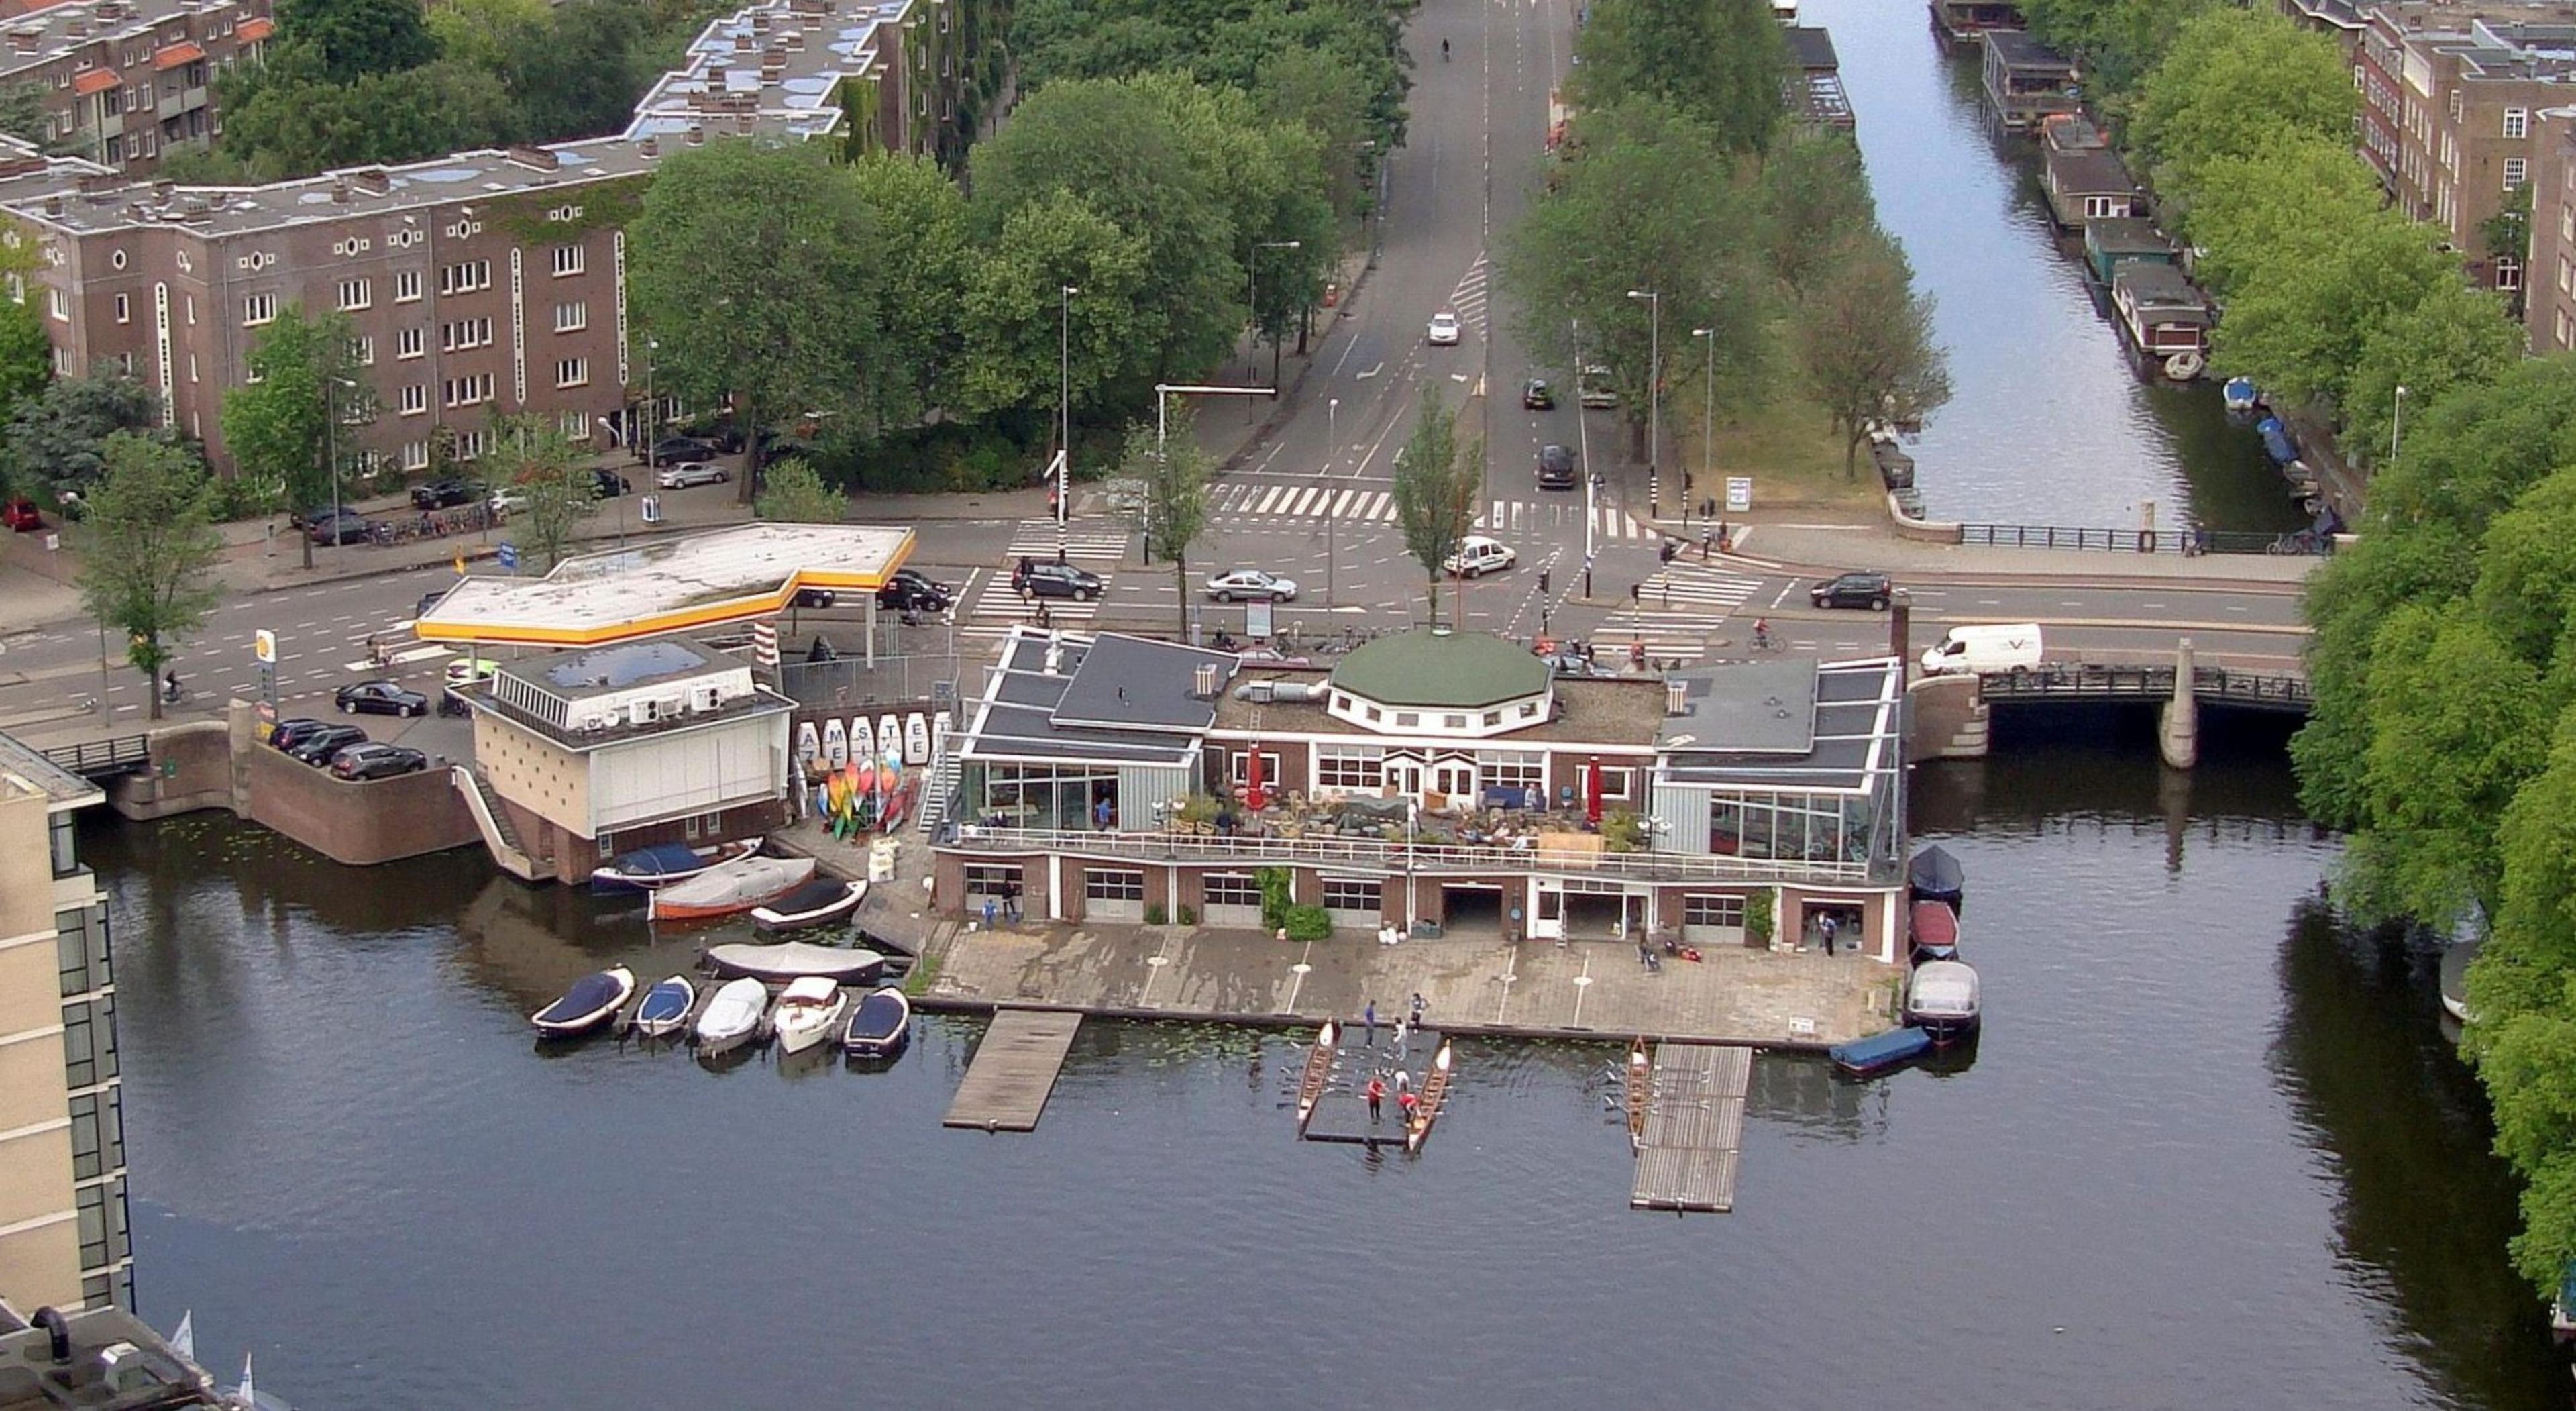 Rowing and Sailing Club "De Amstel"